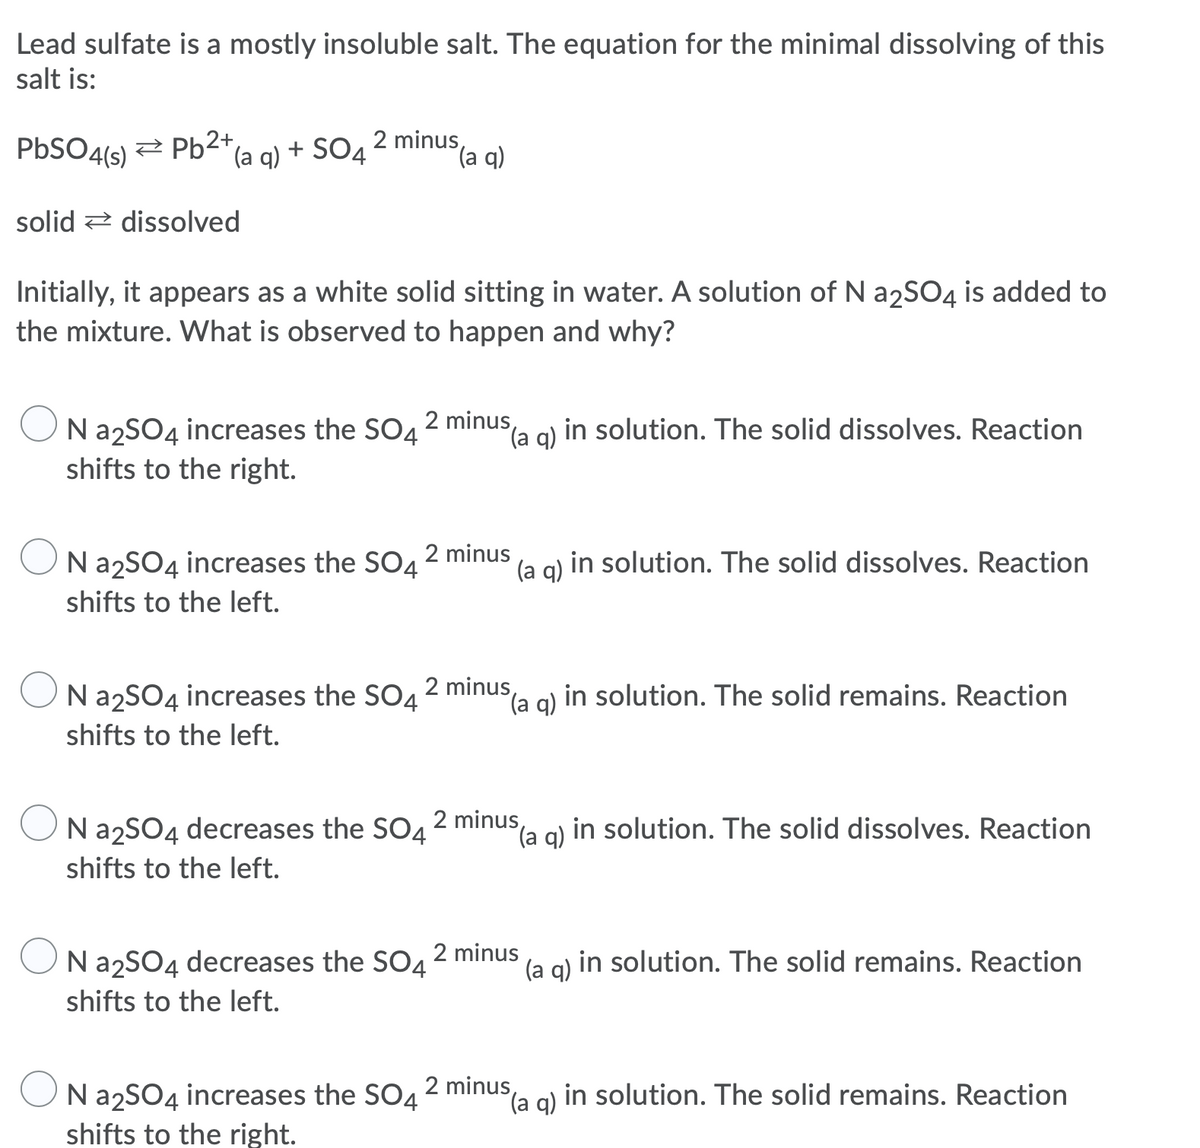 Lead sulfate is a mostly insoluble salt. The equation for the minimal dissolving of this
salt is:
PBSO4(s)
2 Pb2+
(a q) + SO4 2 minus,
(a q)
solid 2 dissolved
Initially, it appears as a white solid sitting in water. A solution of N a2SO4 is added to
the mixture. What is observed to happen and why?
N azSO4 increases the SO42 minusa g) in solution. The solid dissolves. Reaction
shifts to the right.
(a q)
2 minus
Na2SO4 increases the SO4
(a g) in solution. The solid dissolves. Reaction
shifts to the left.
N a2SO4 increases the SO4
2 minus
q)
la g) in solution. The solid remains. Reaction
shifts to the left.
N a2SO4 decreases the SO42 minus,
Sla g) in solution. The solid dissolves. Reaction
shifts to the left.
Na2SO4 decreases the SO4
2 minus
q)
(a g) in solution. The solid remains. Reaction
shifts to the left.
Na2SO4 increases the SO4
2 minus
(a q)
in solution. The solid remains. Reaction
shifts to the right.
